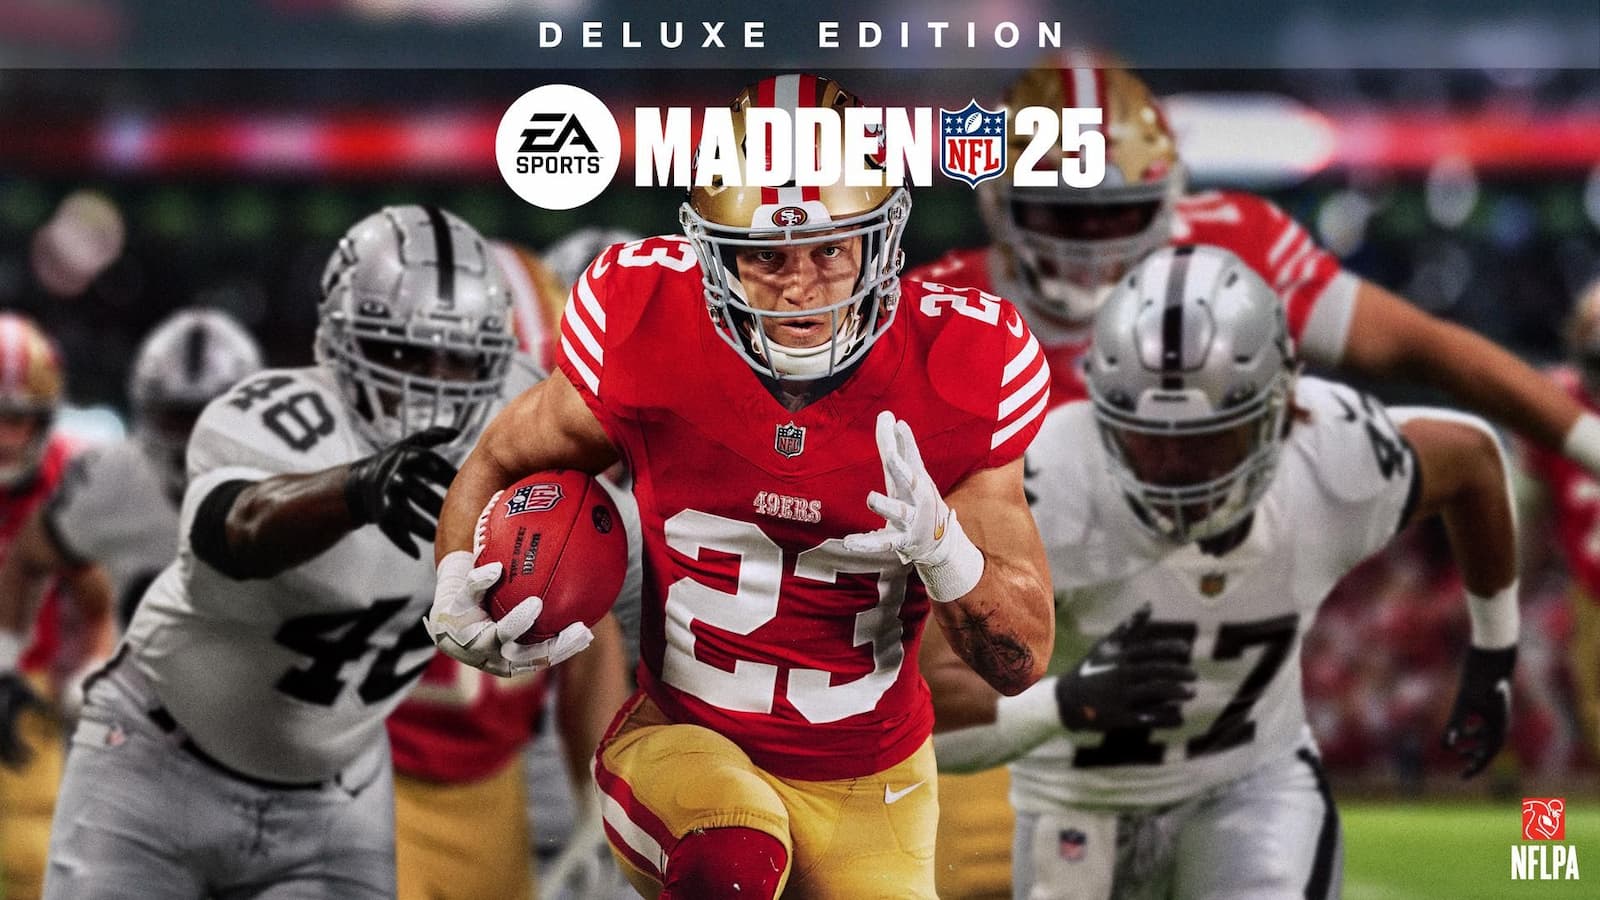 Madden 25 deluxe edition cover